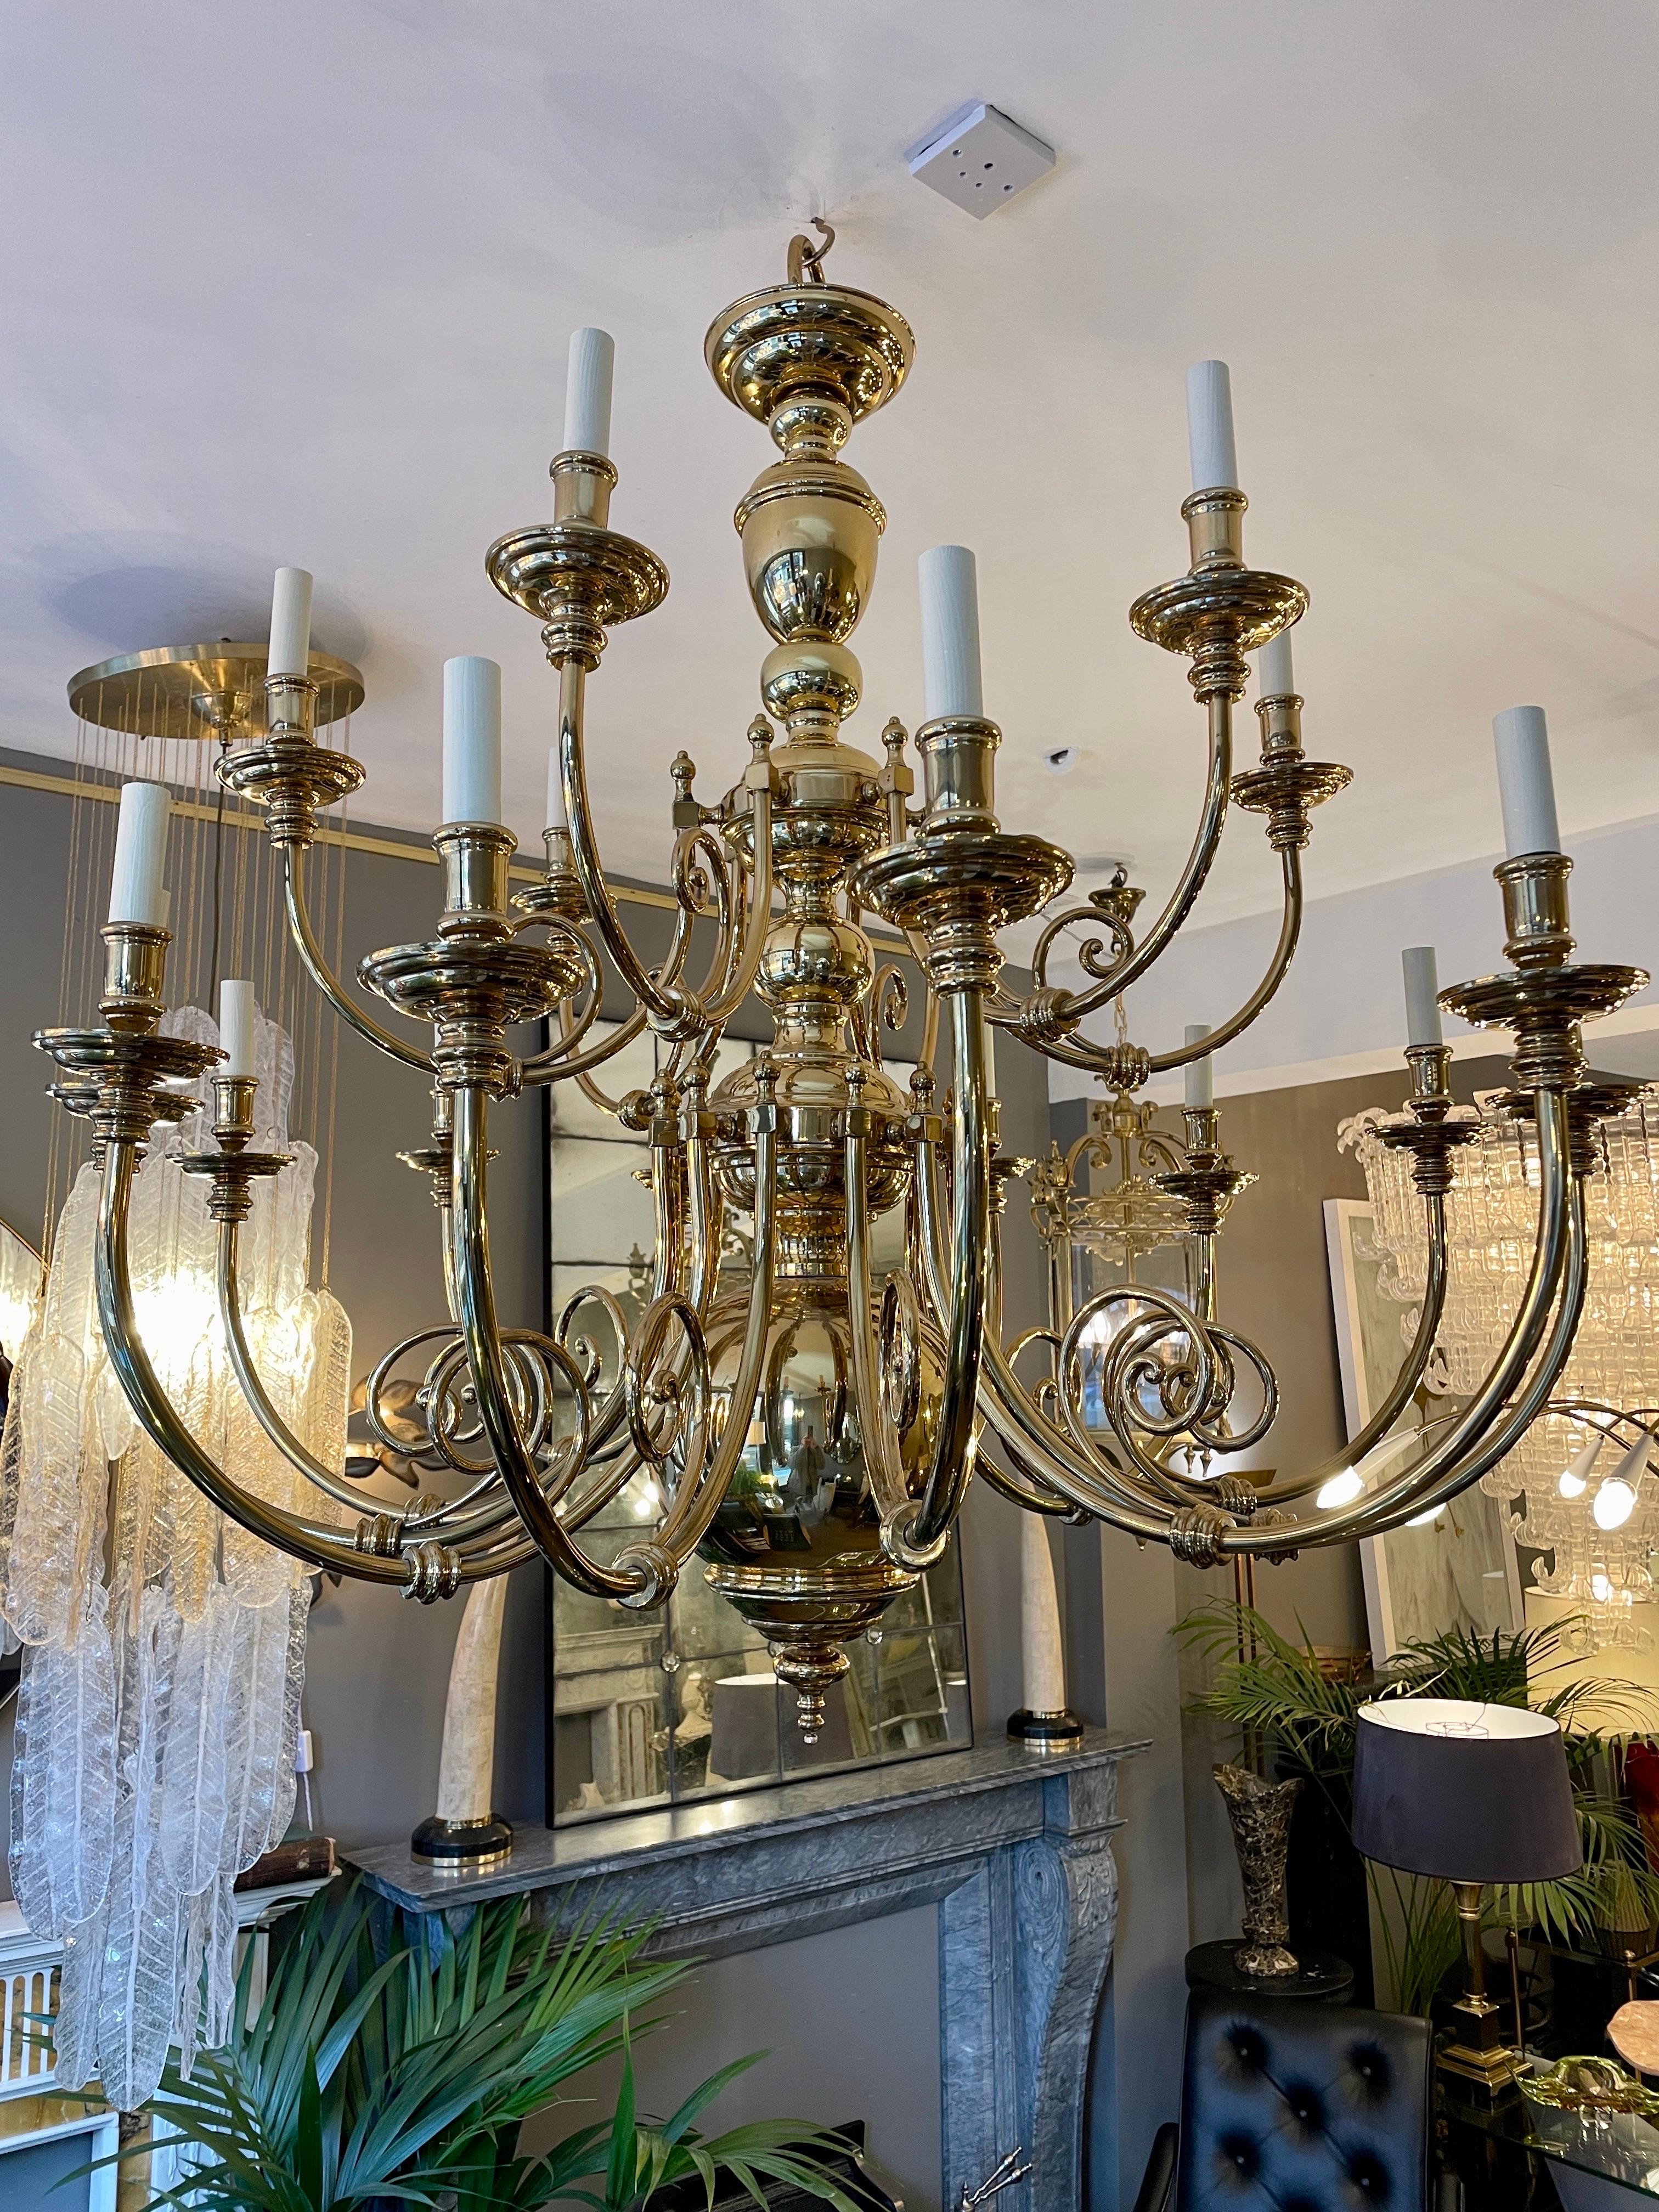 A large and impressive Flemish 18th century style chandelier with 18 arm. The baluster stem supporting two tiers of arms 12 to lower and 6 above. All the arms with matching scroll work, turned nozzles and drip pans. 

The chandelier will be re